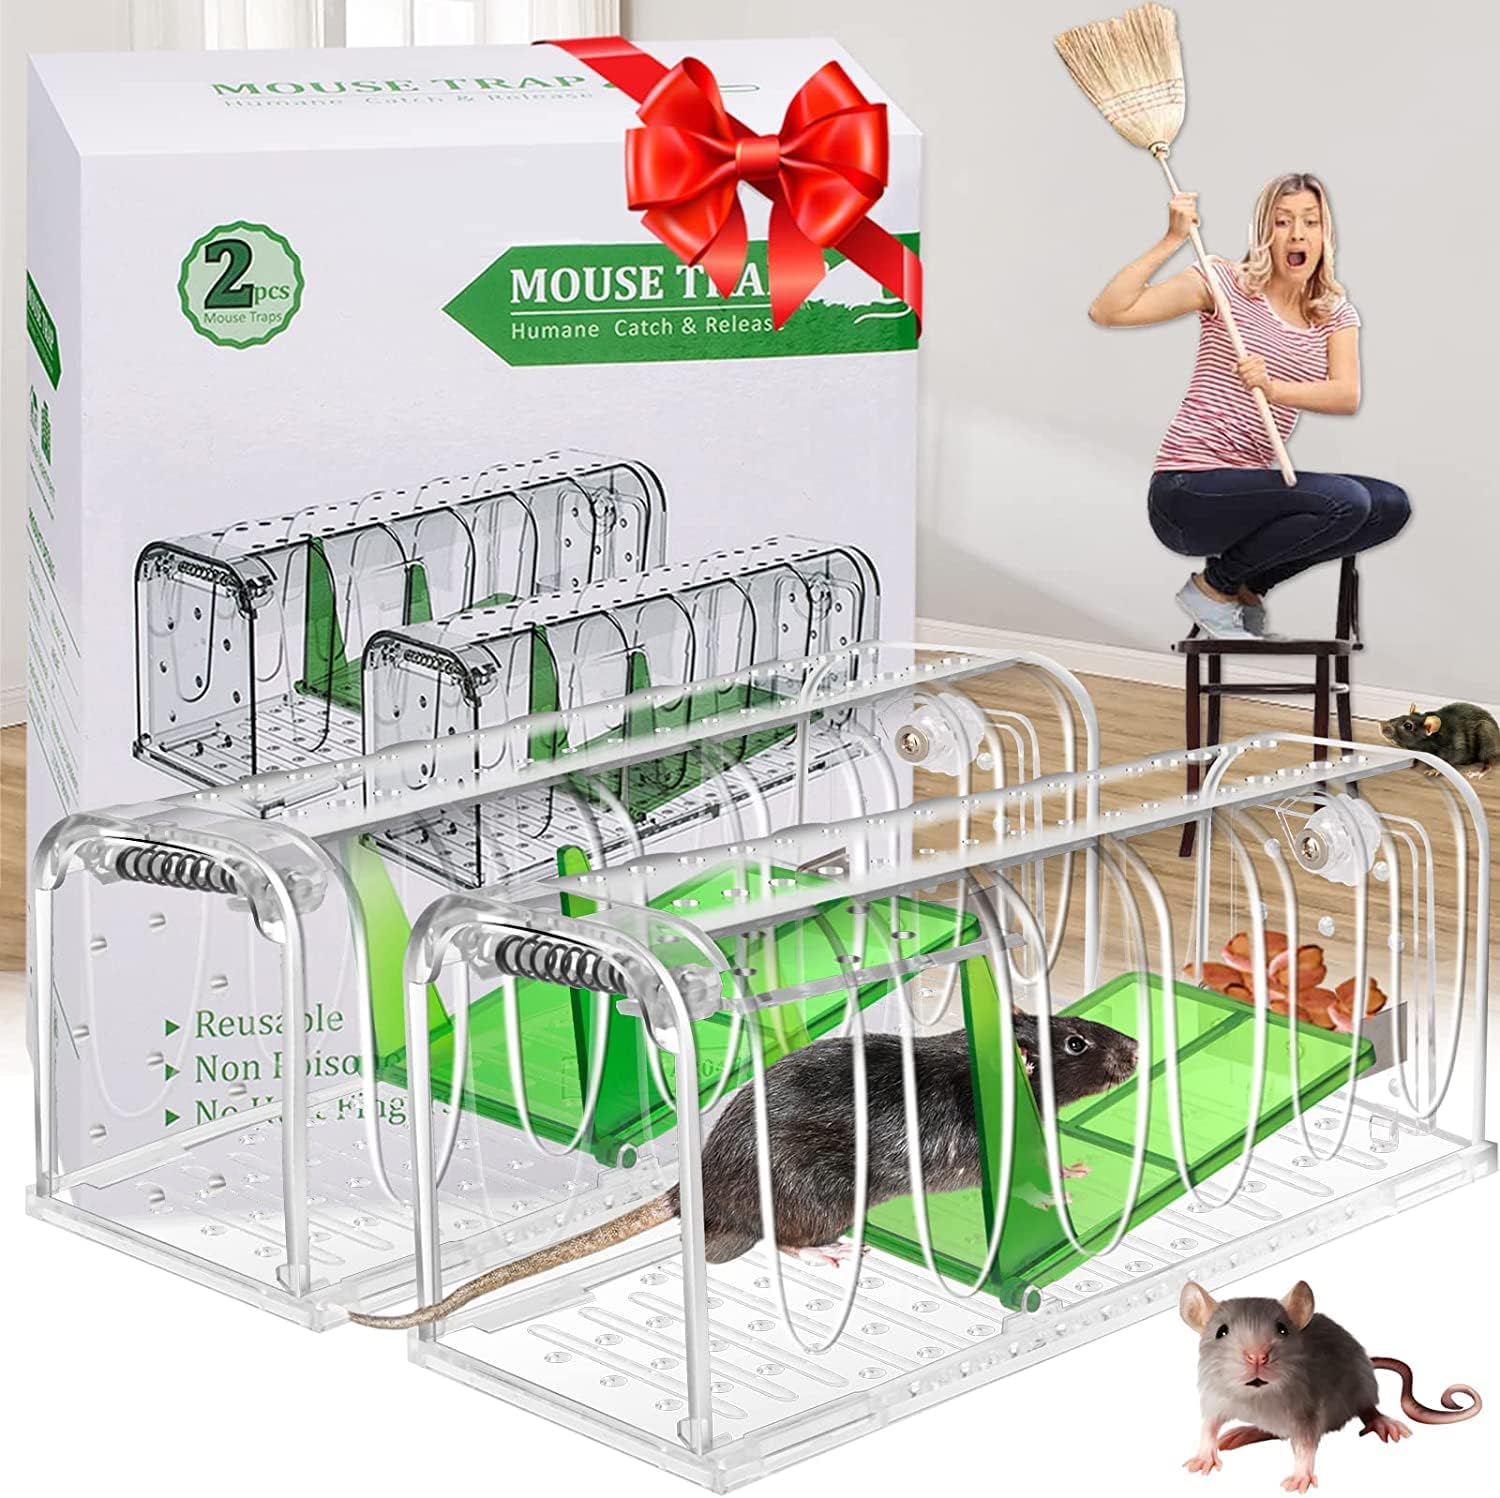 Humane Mouse Traps Indoor Outdoor, No Kill Mouse [...]